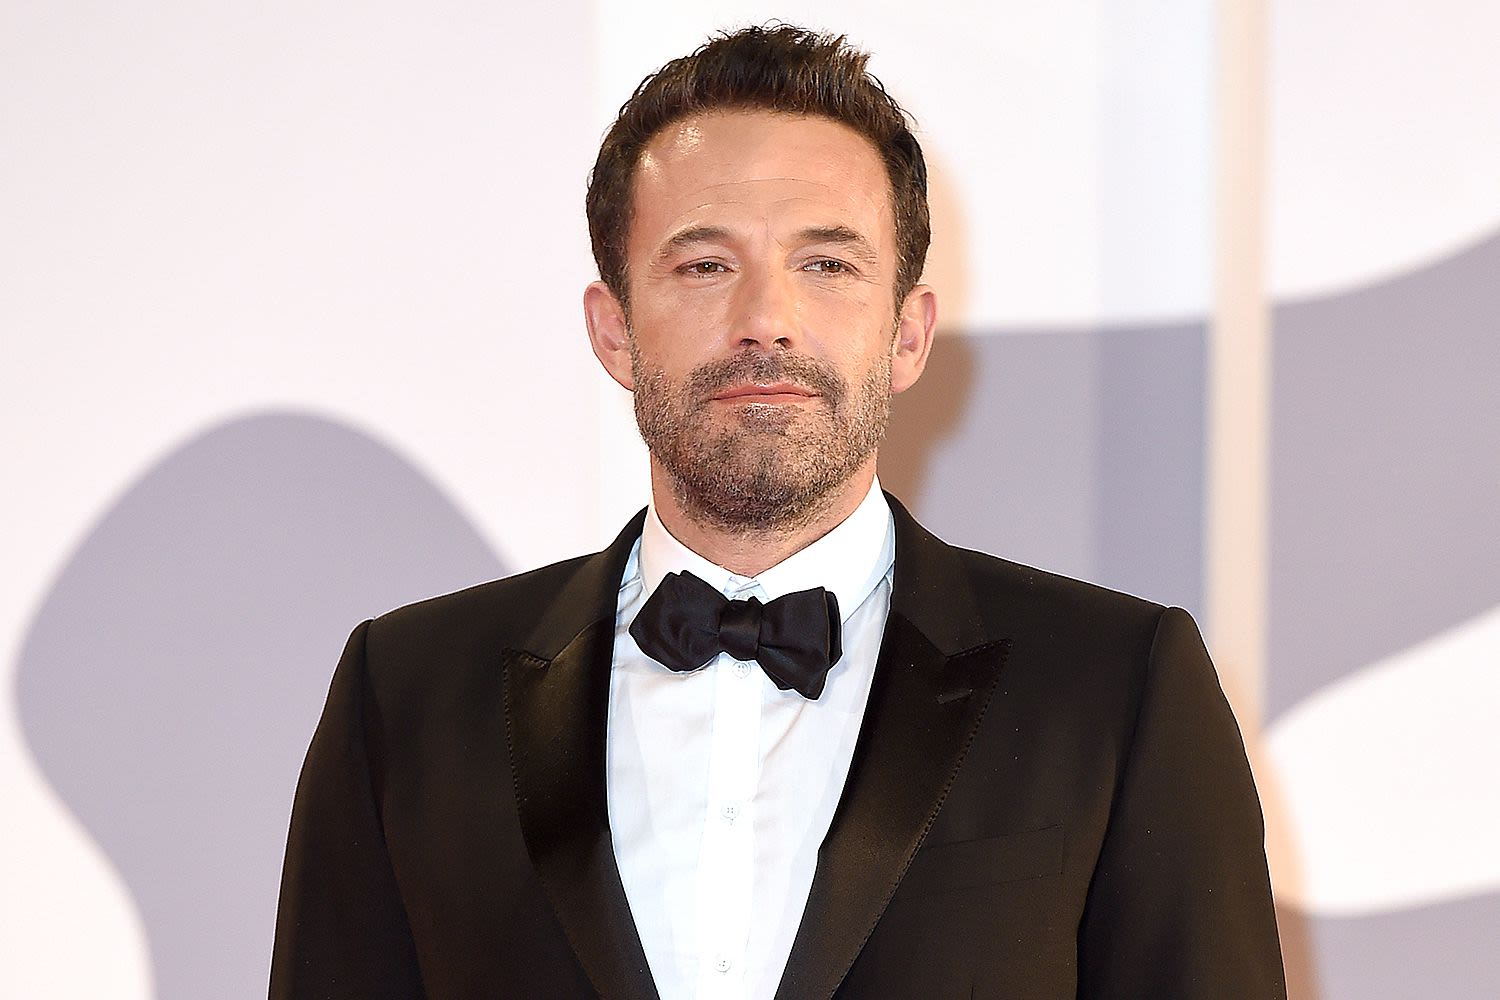 Ben Affleck’s New $20 Million L.A. Home Has a ‘Sense of Privacy and Seclusion’ and Is ‘Not Trendy’: Source (Exclusive)